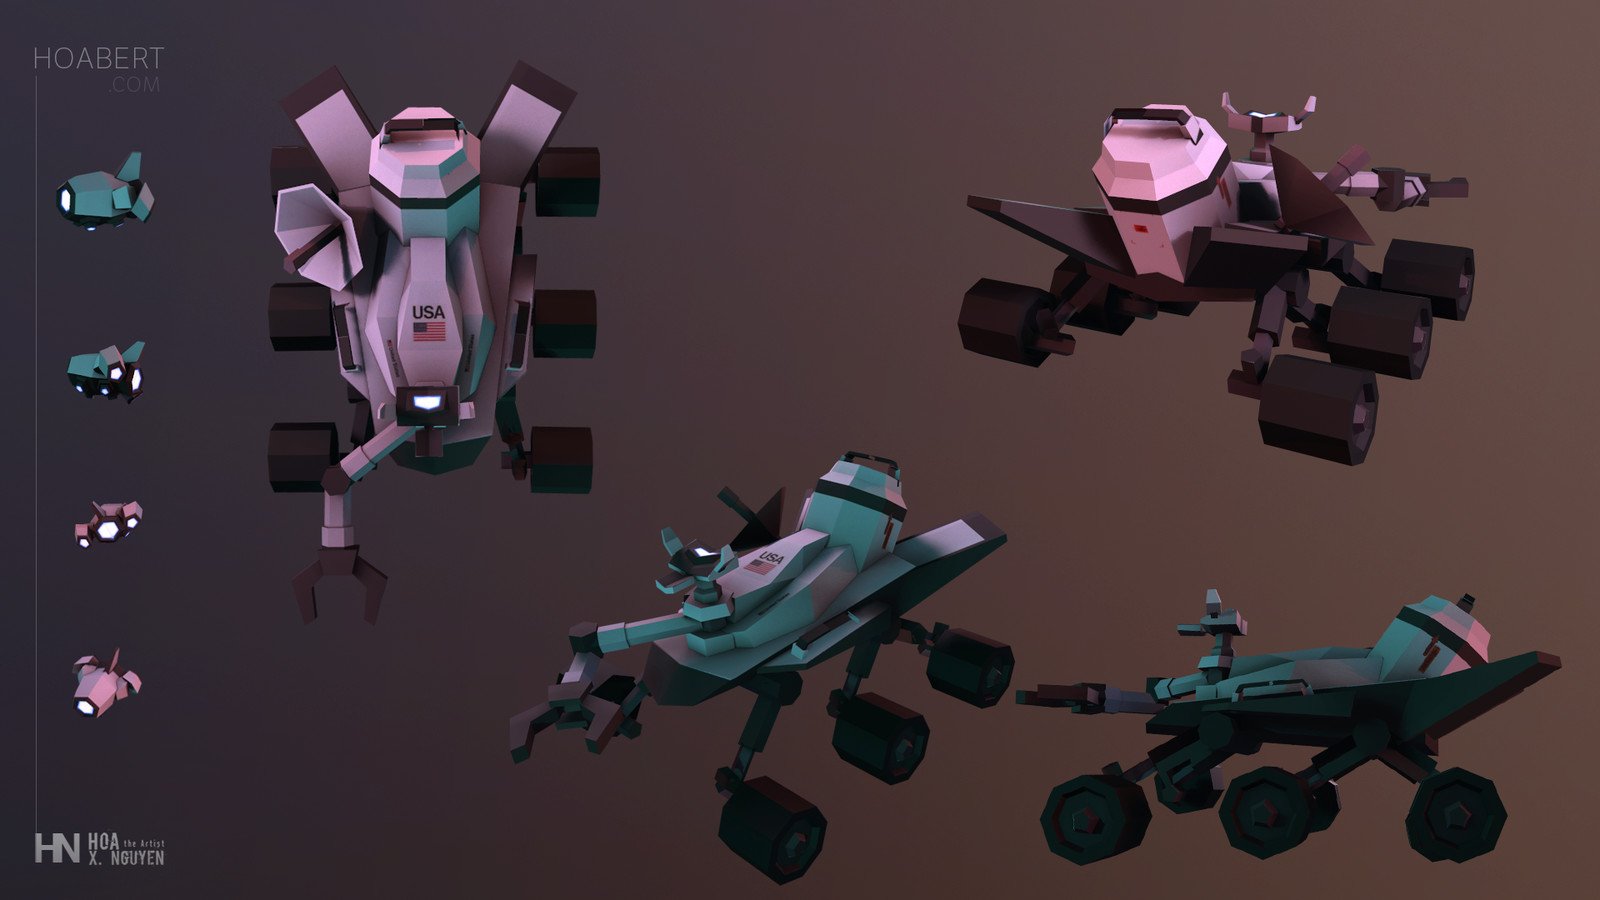 Some shots of the rover. I had a lot of fun designing the base and pod. 